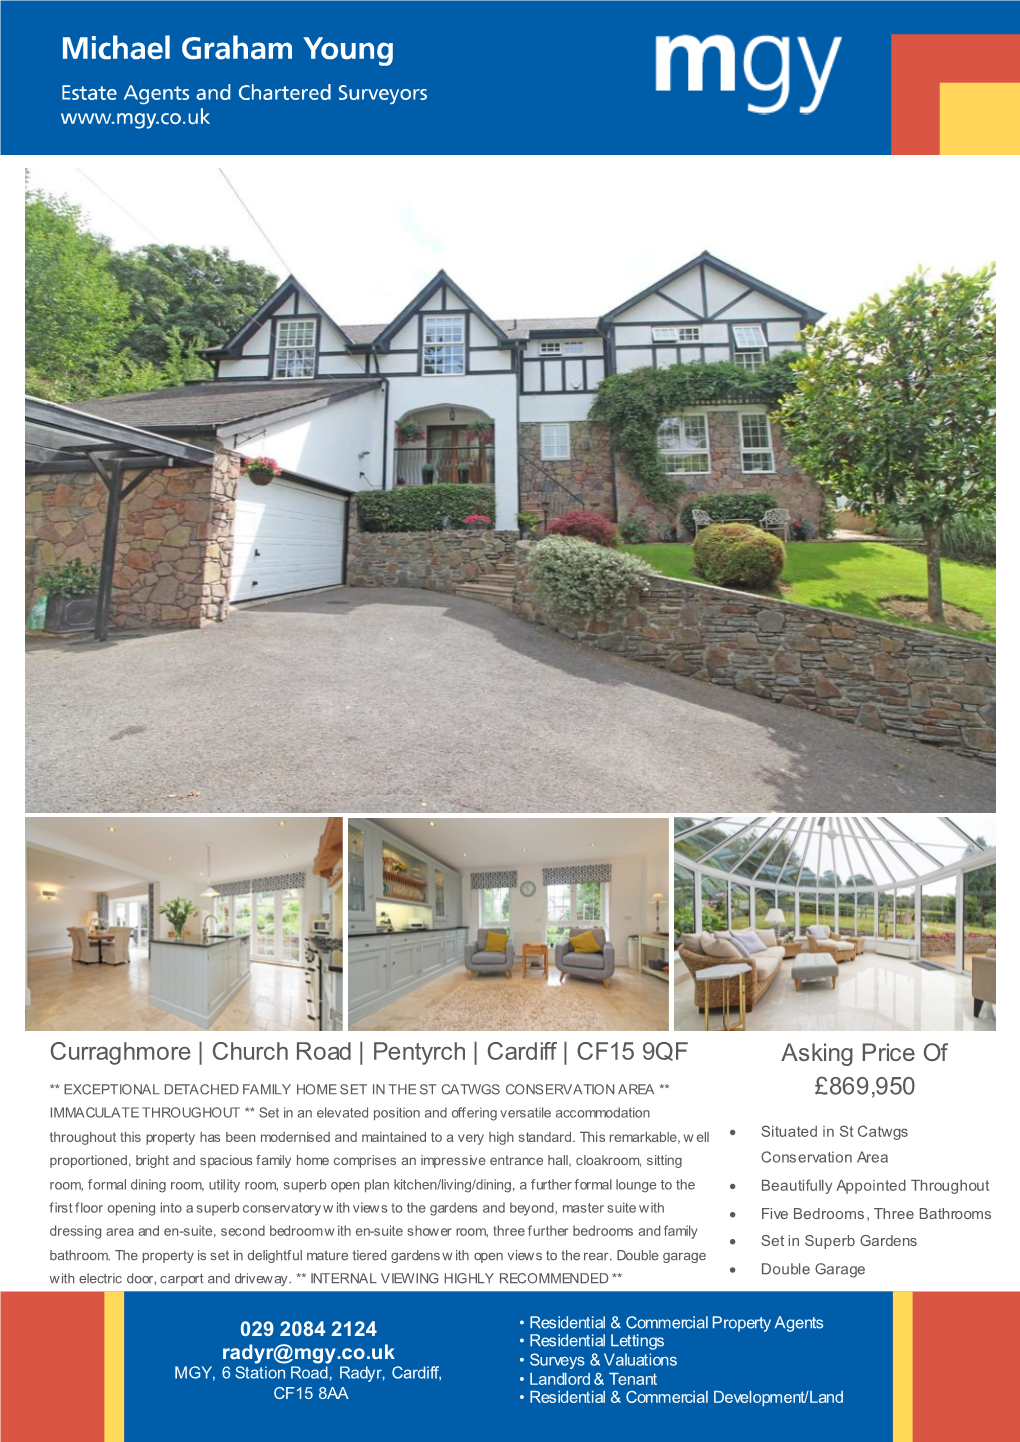 Curraghmore | Church Road | Pentyrch | Cardiff | CF15 9QF Asking Price Of